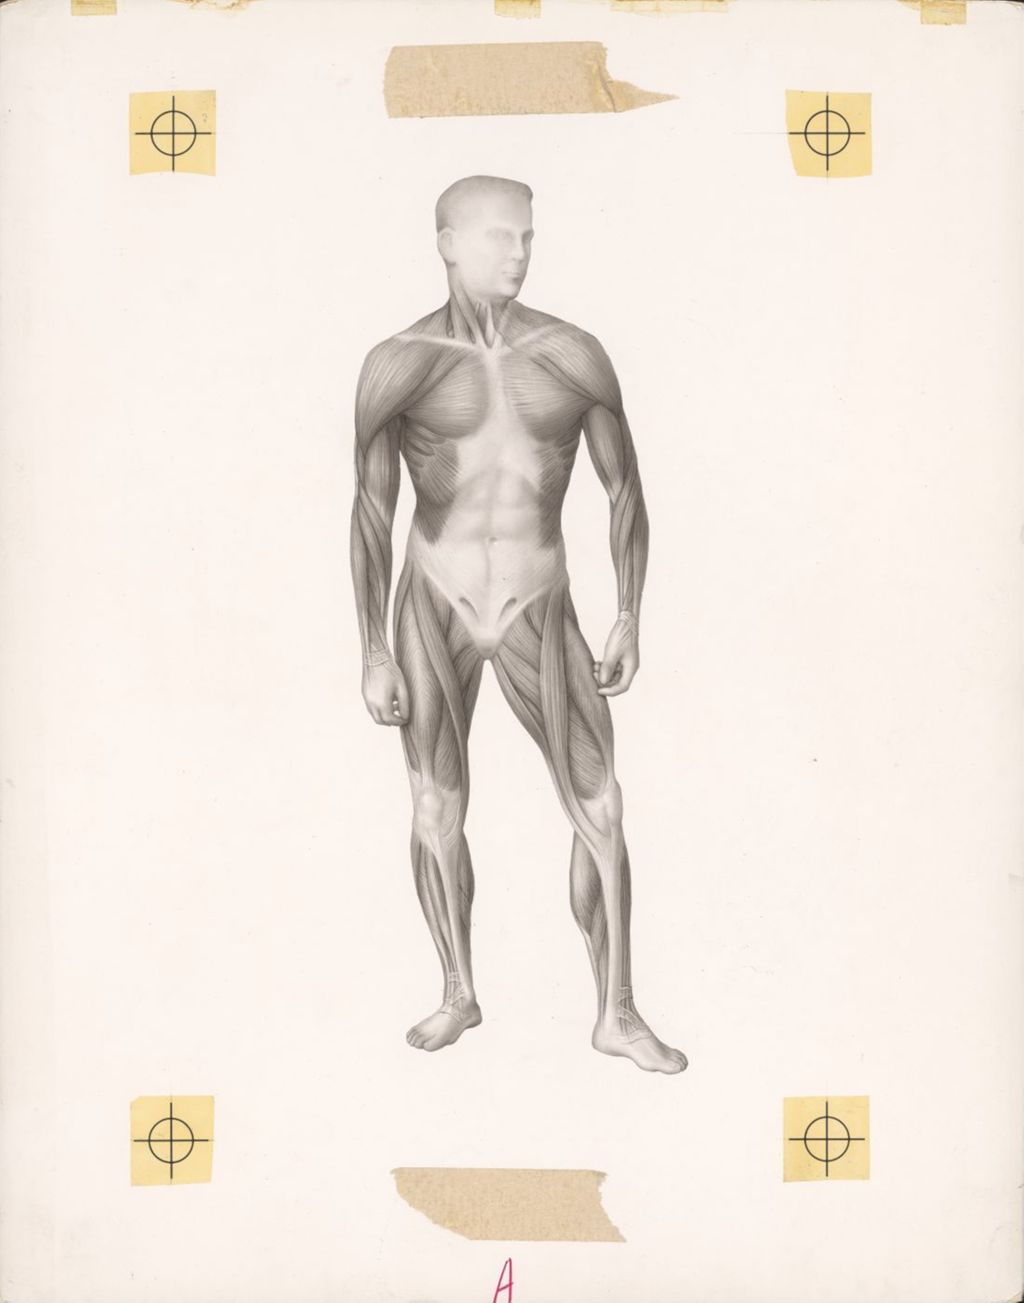 Musculatory system of a standing man